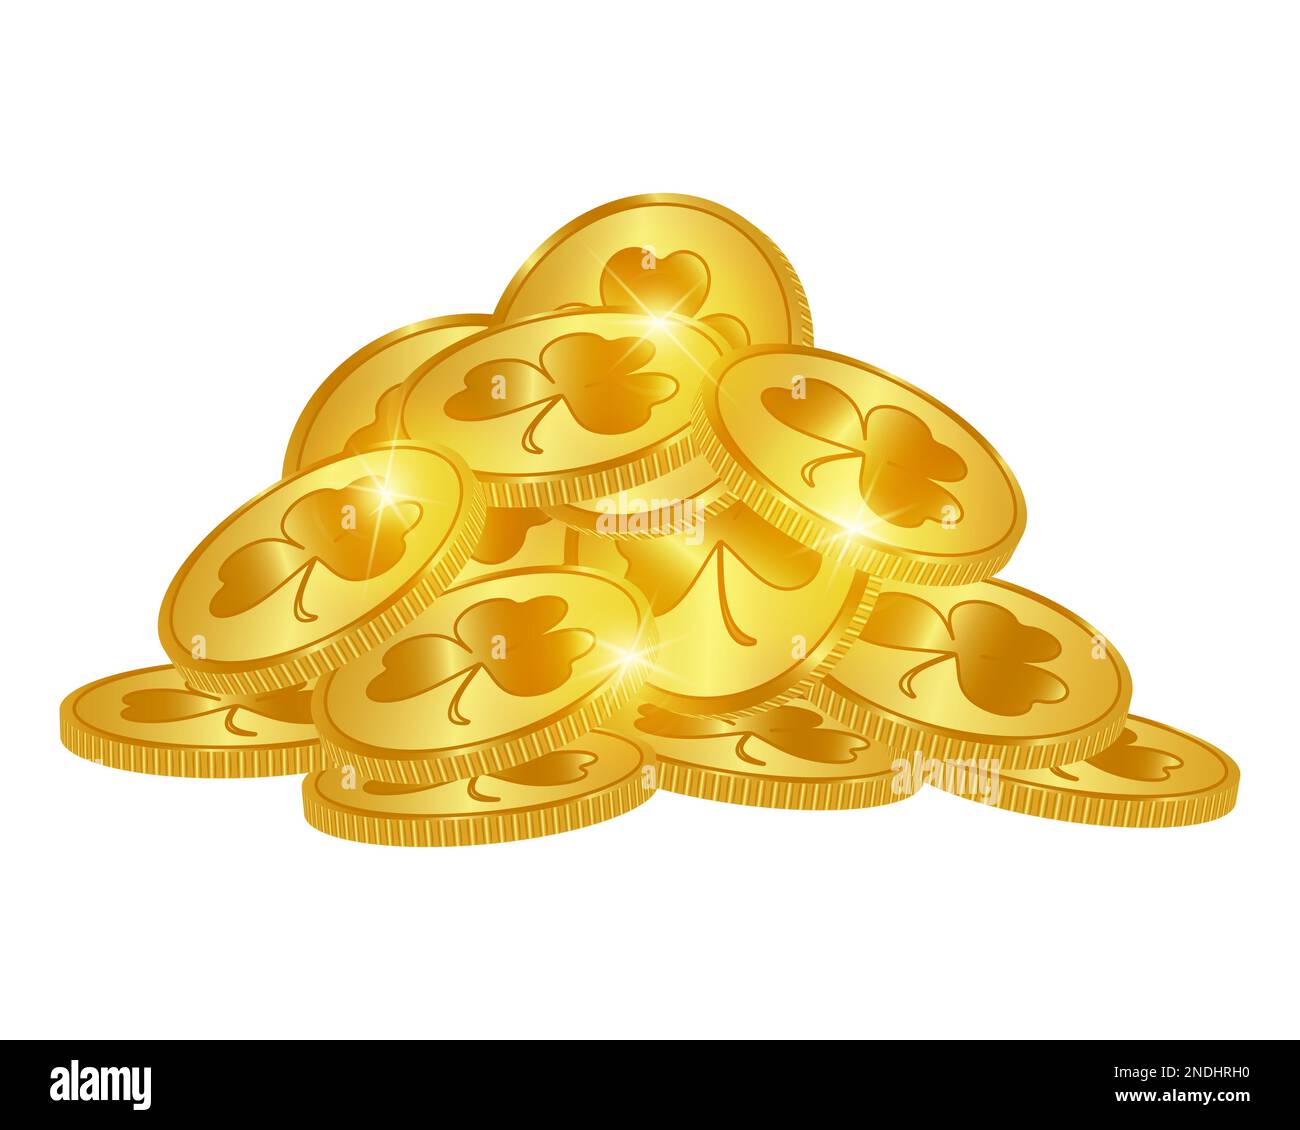 Golden coins with St. Patrick's Day shamrock. Gold coins 3d. Irish symbol of good luck. wealth. Vector illustration. Stock Vector